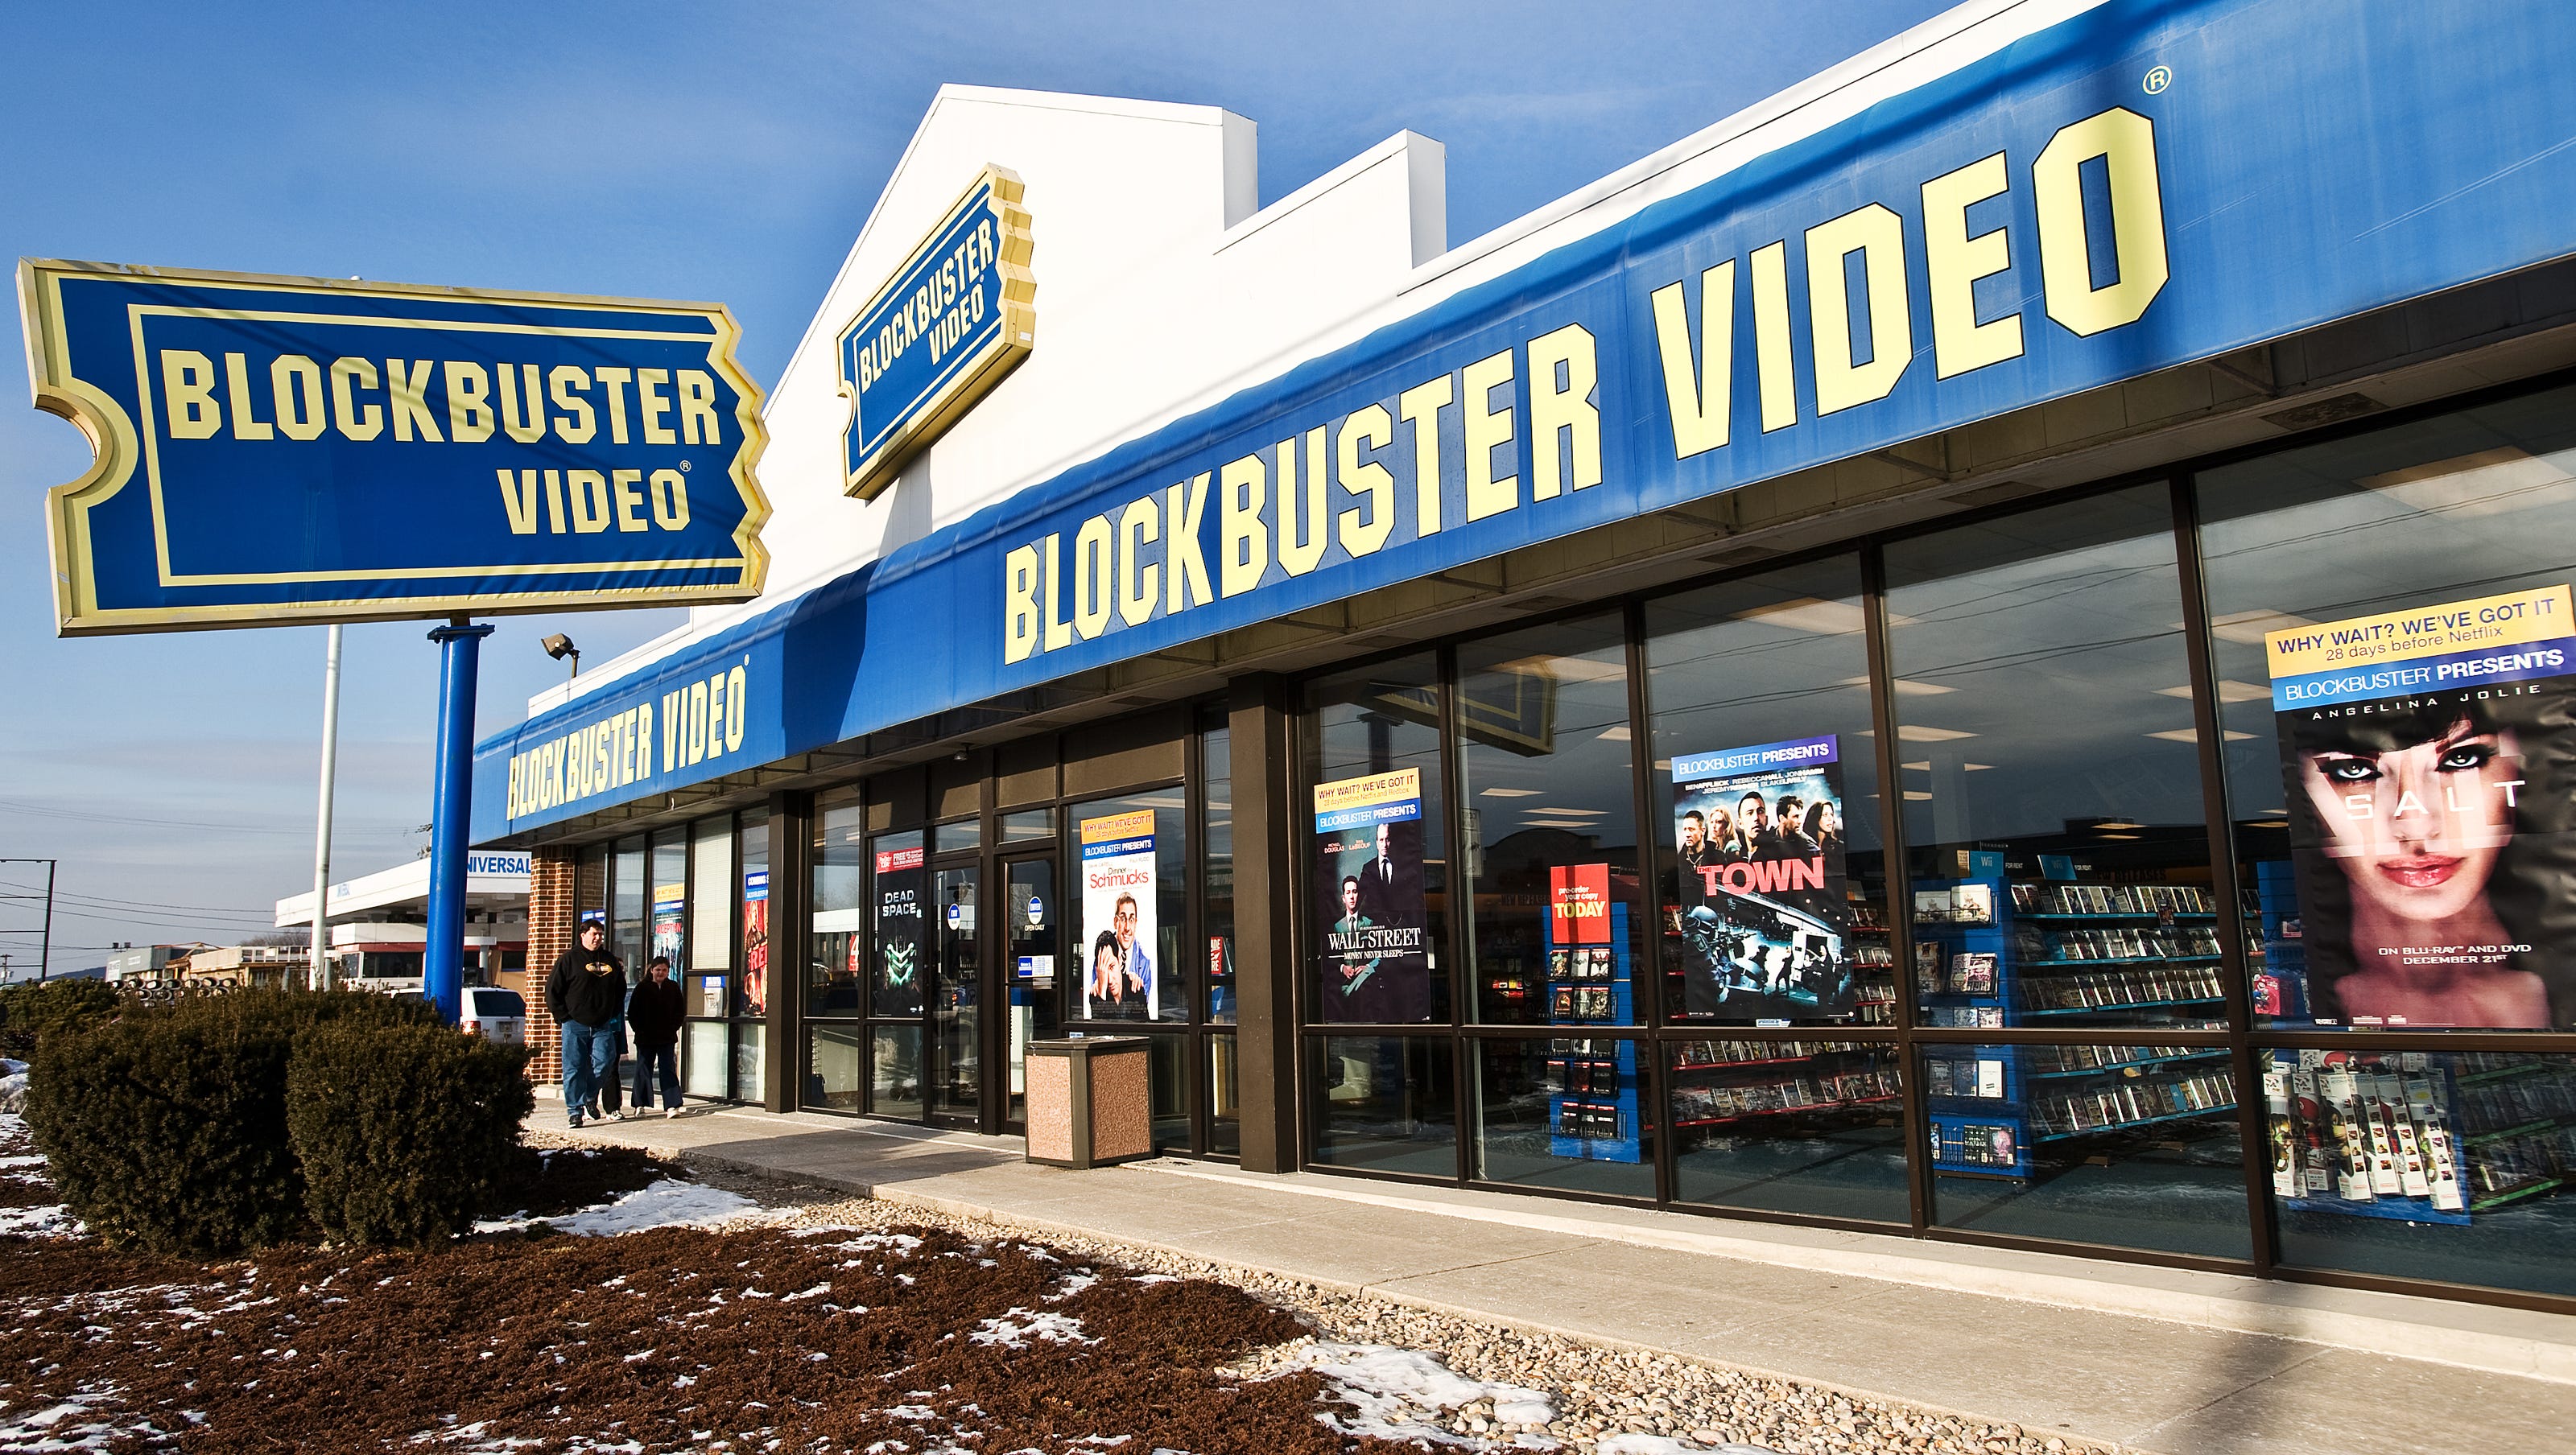 What's going into Hanover's old Blockbuster Video building?